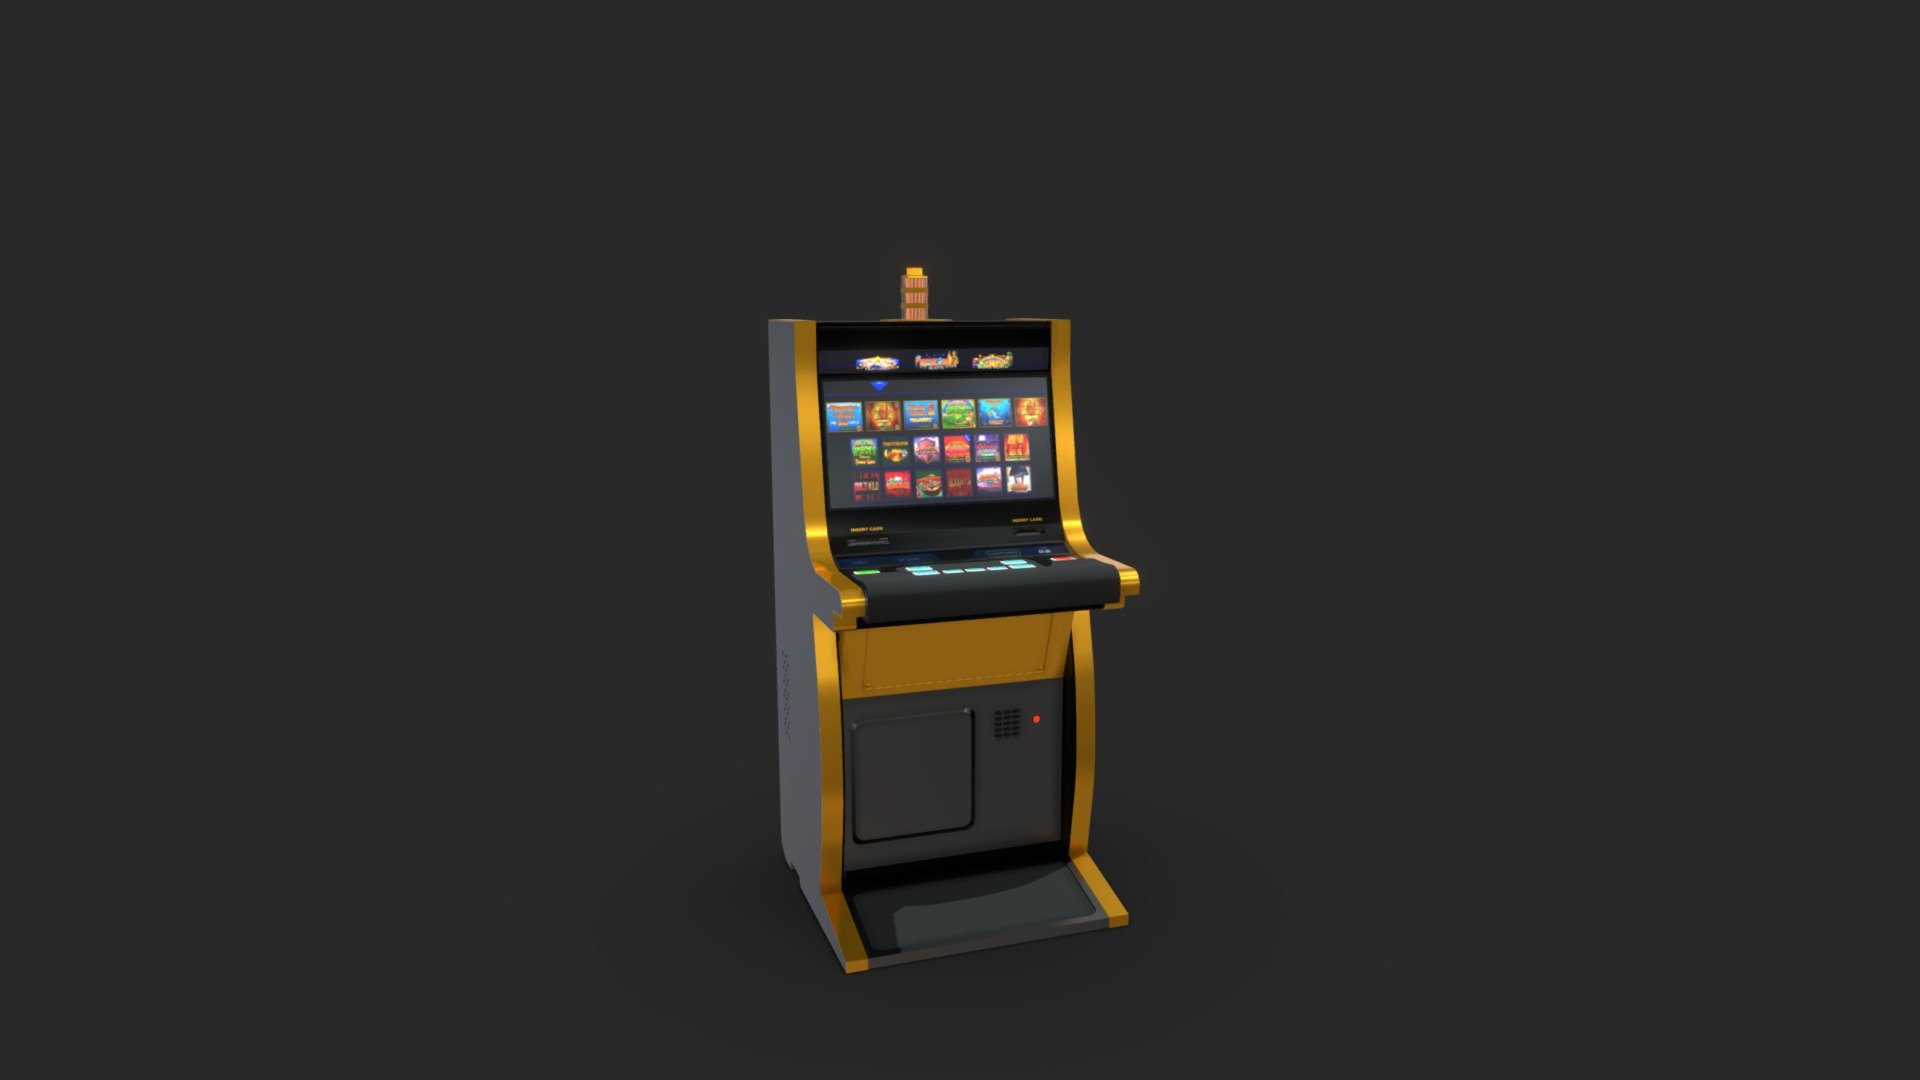 Las Vegas Casino Slot Machine High Poly to spec. Textured, ready for VR / AR

Materials Seperated for easy PBR use. FREE geometry nodes to array slot machines in rows and columns for better optimization. Blender 3.0 and up - Slot Machine - Video Poker, Keno, Blackjack - Buy Royalty Free 3D model by Unreal Designer (@unrealdesigner.ig) 3d model